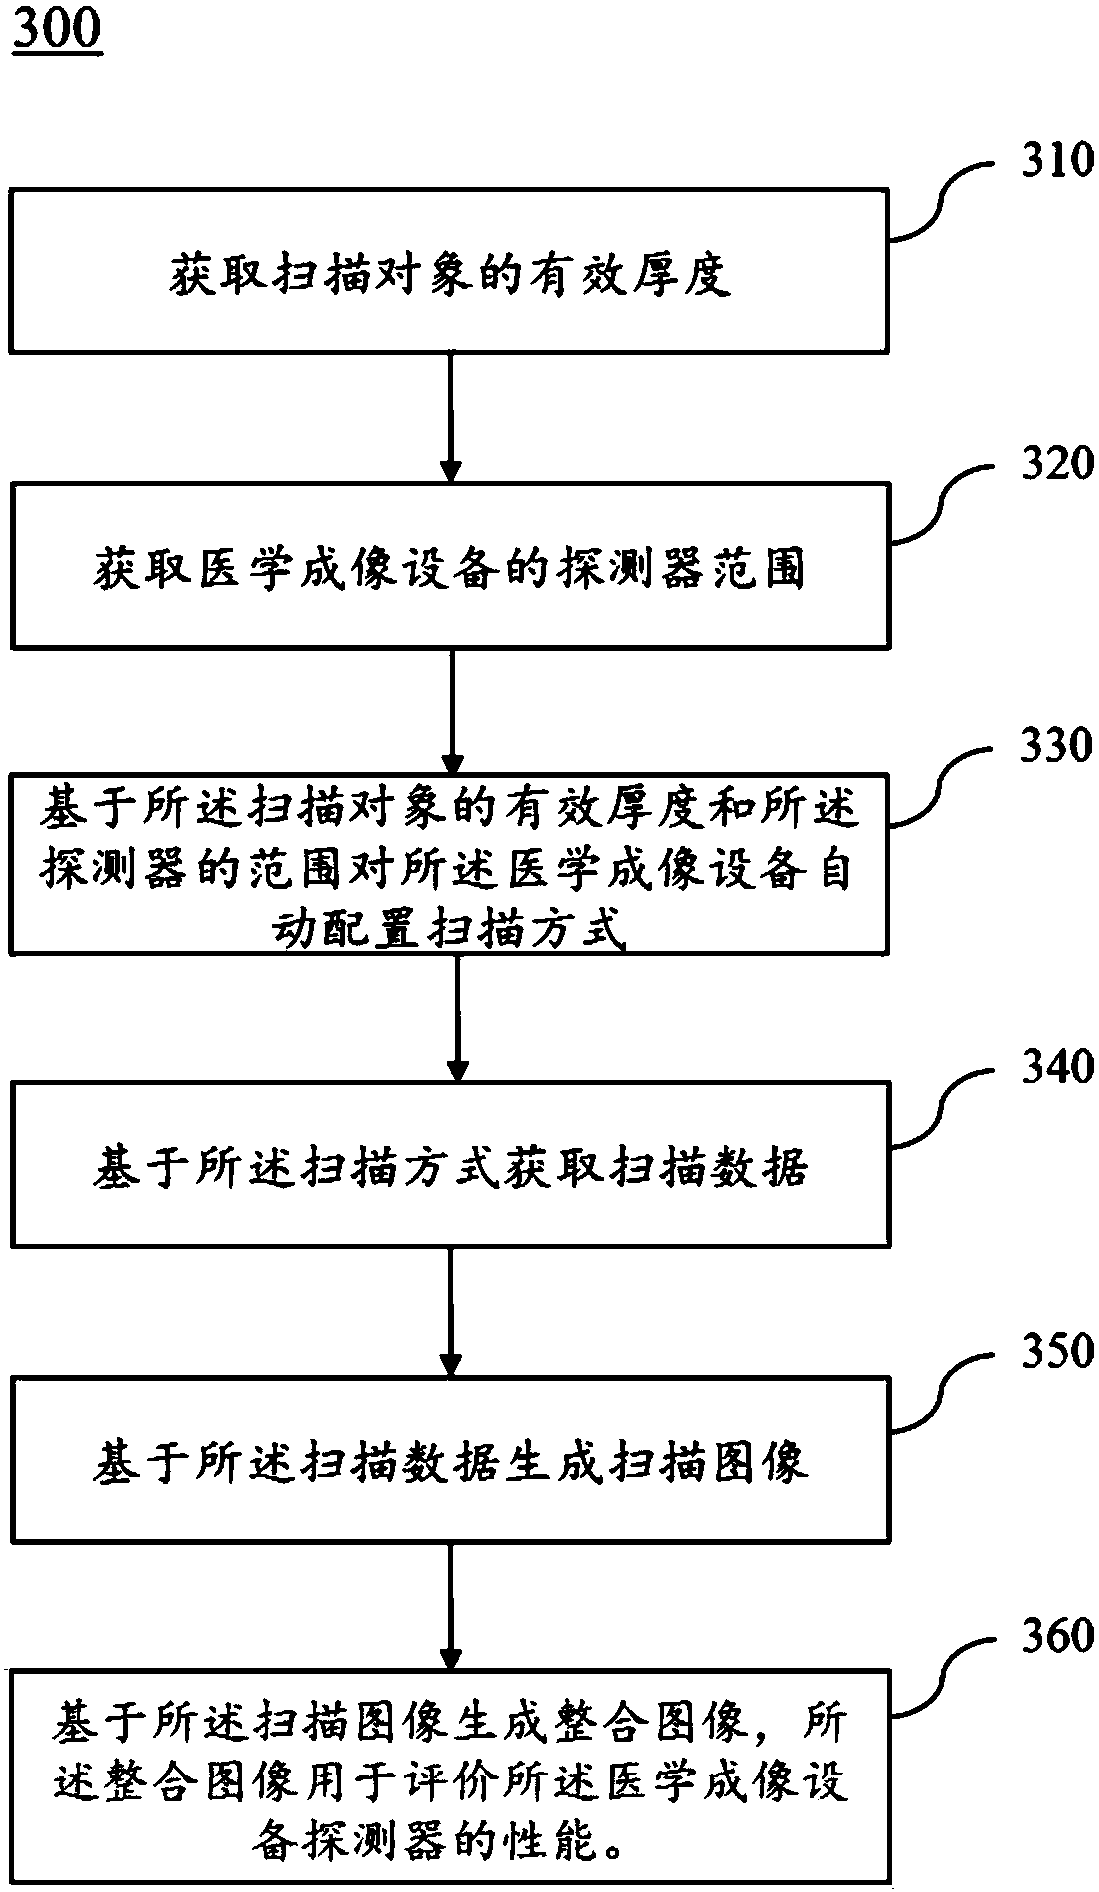 Medical imaging device and method for obtaining images for evaluating performance thereof